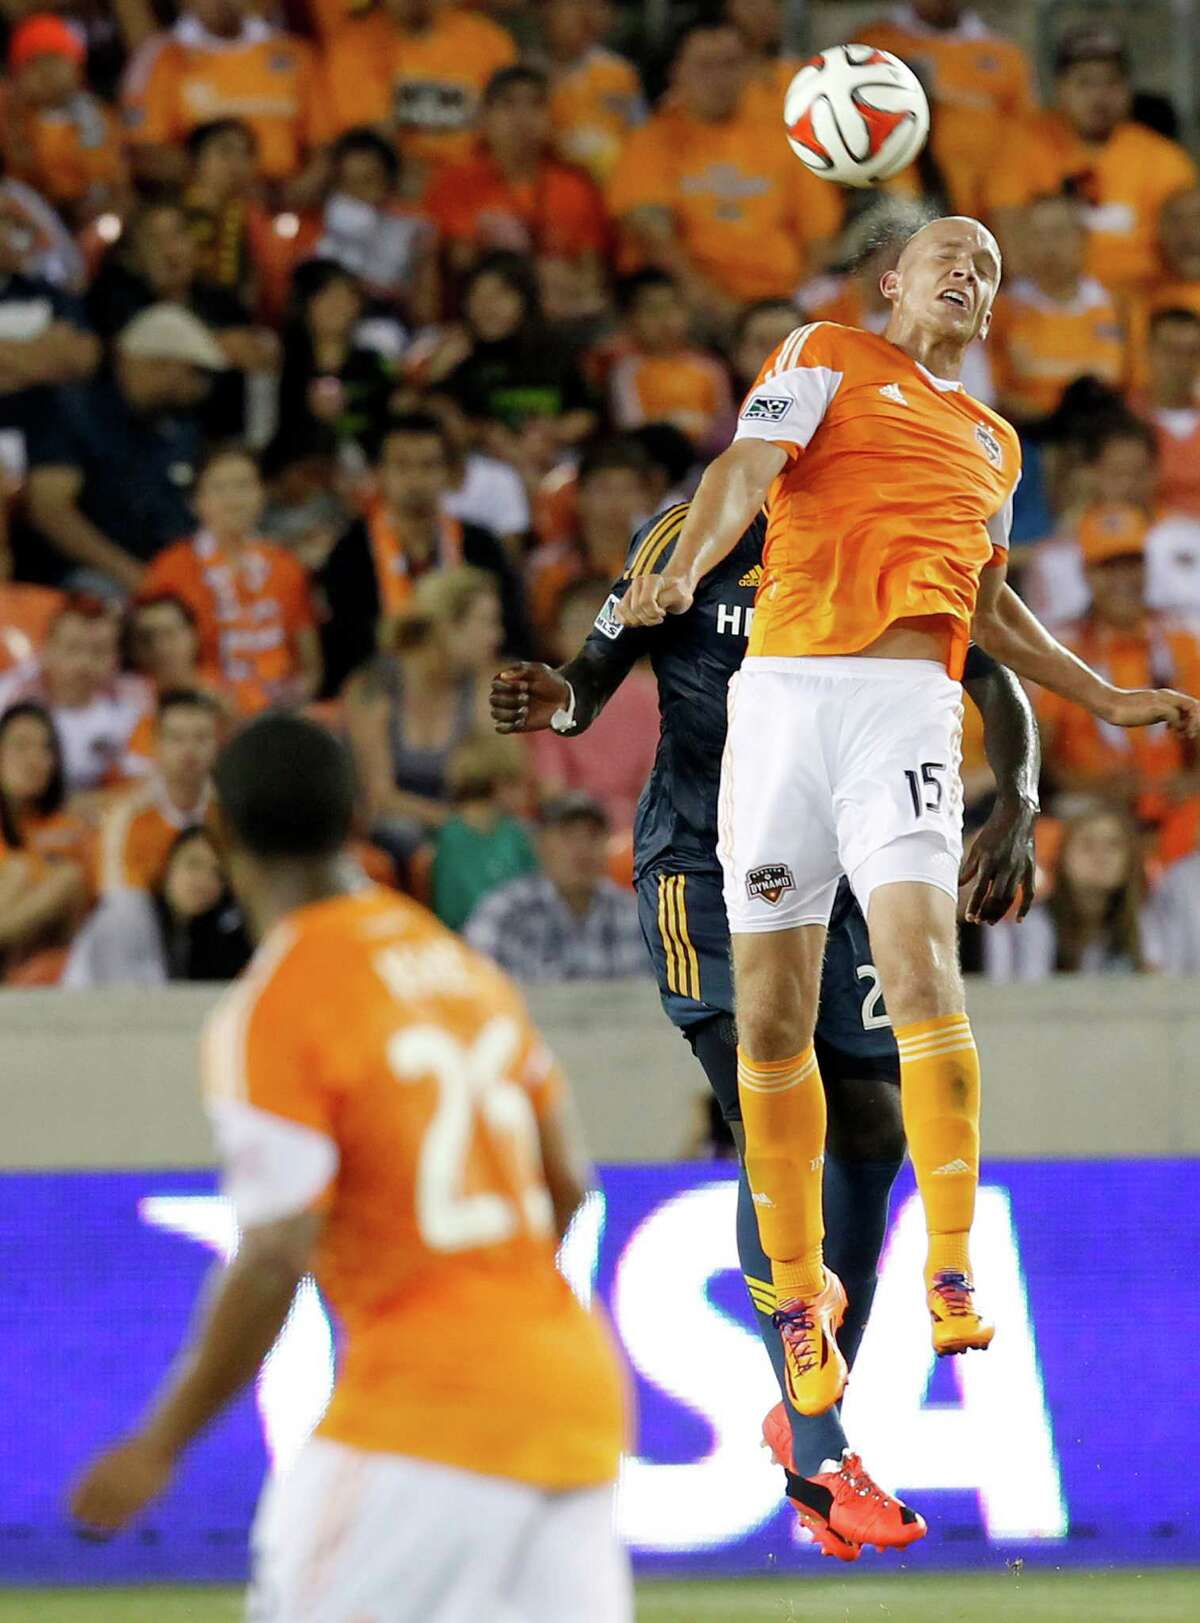 Dynamo forward Mark Sherrod wins the aerial battle against the Galaxy in the second half Saturday as the Orange prevailed 1-0 at BBVA Compass Stadium.